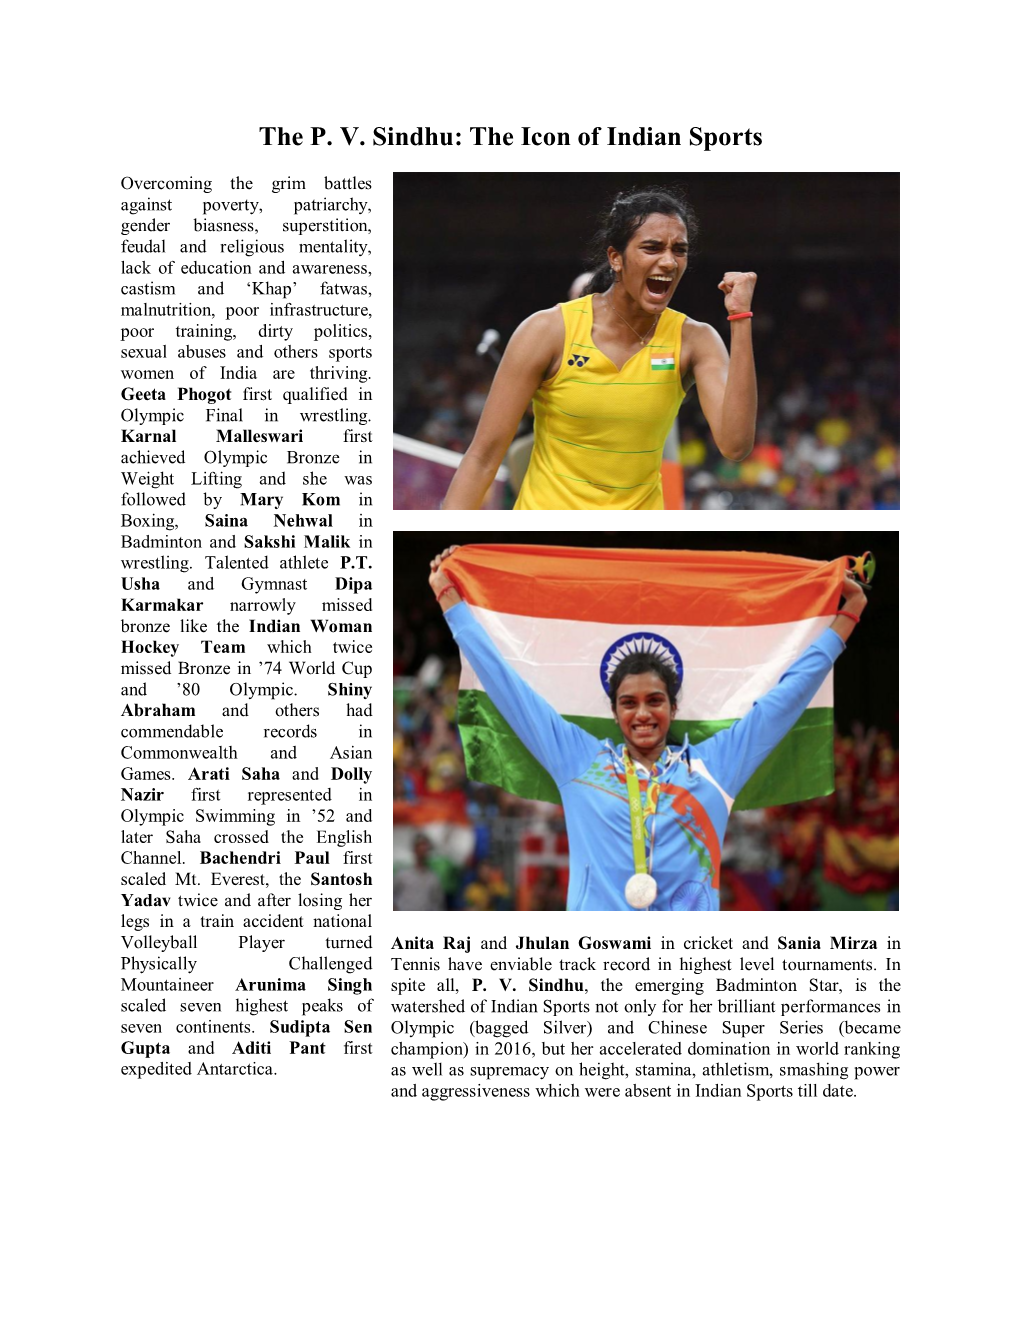 The P. V. Sindhu: the Icon of Indian Sports